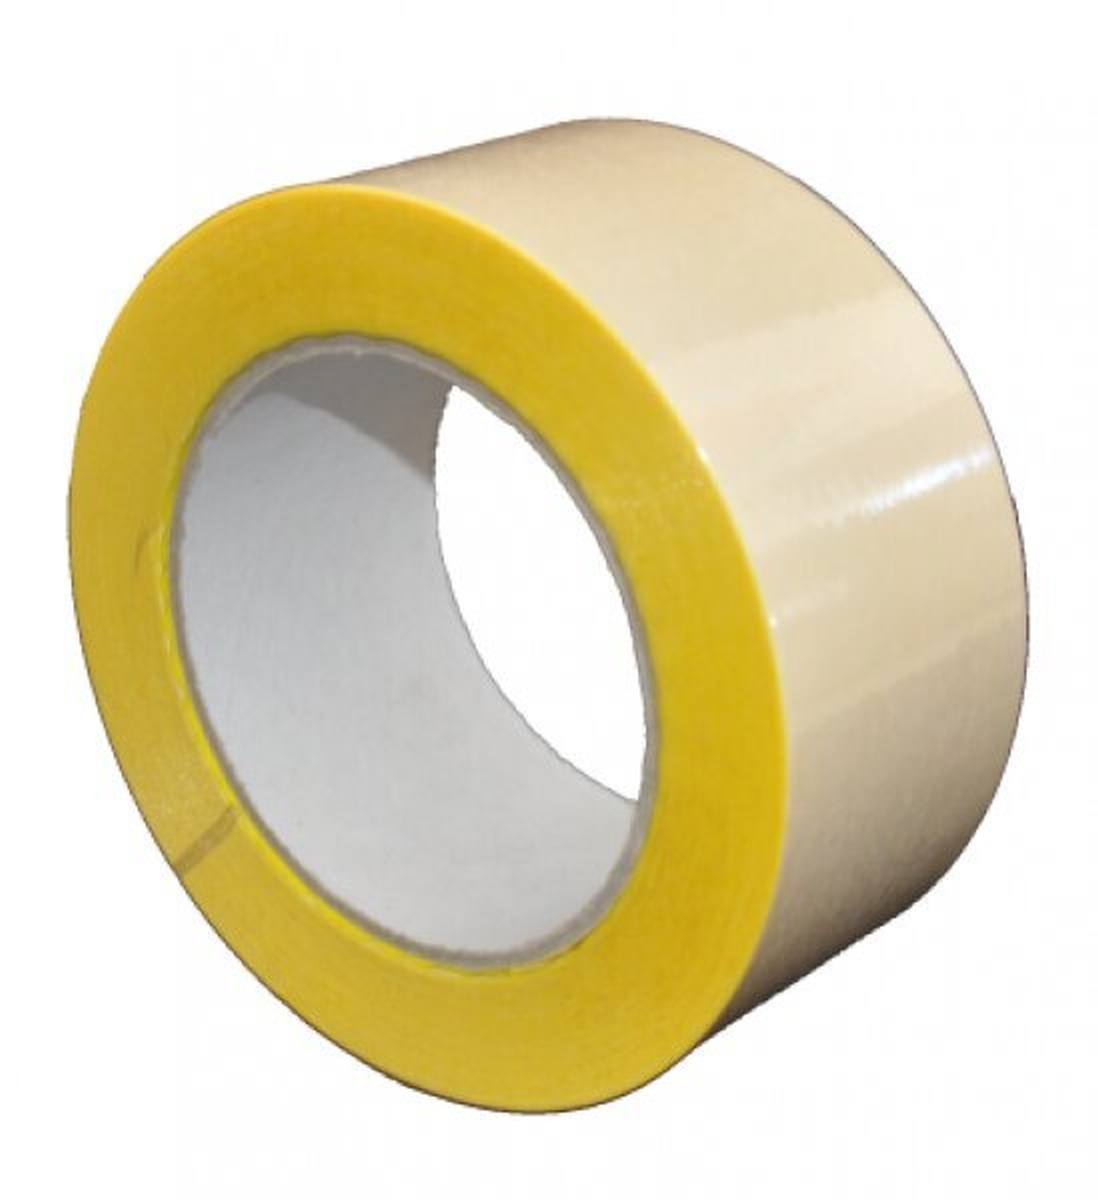 S-K-S 407 Double-sided adhesive tape with polypropylene backing, high / low tack, yellow, 50 mm x 25 m, 0.15 mm